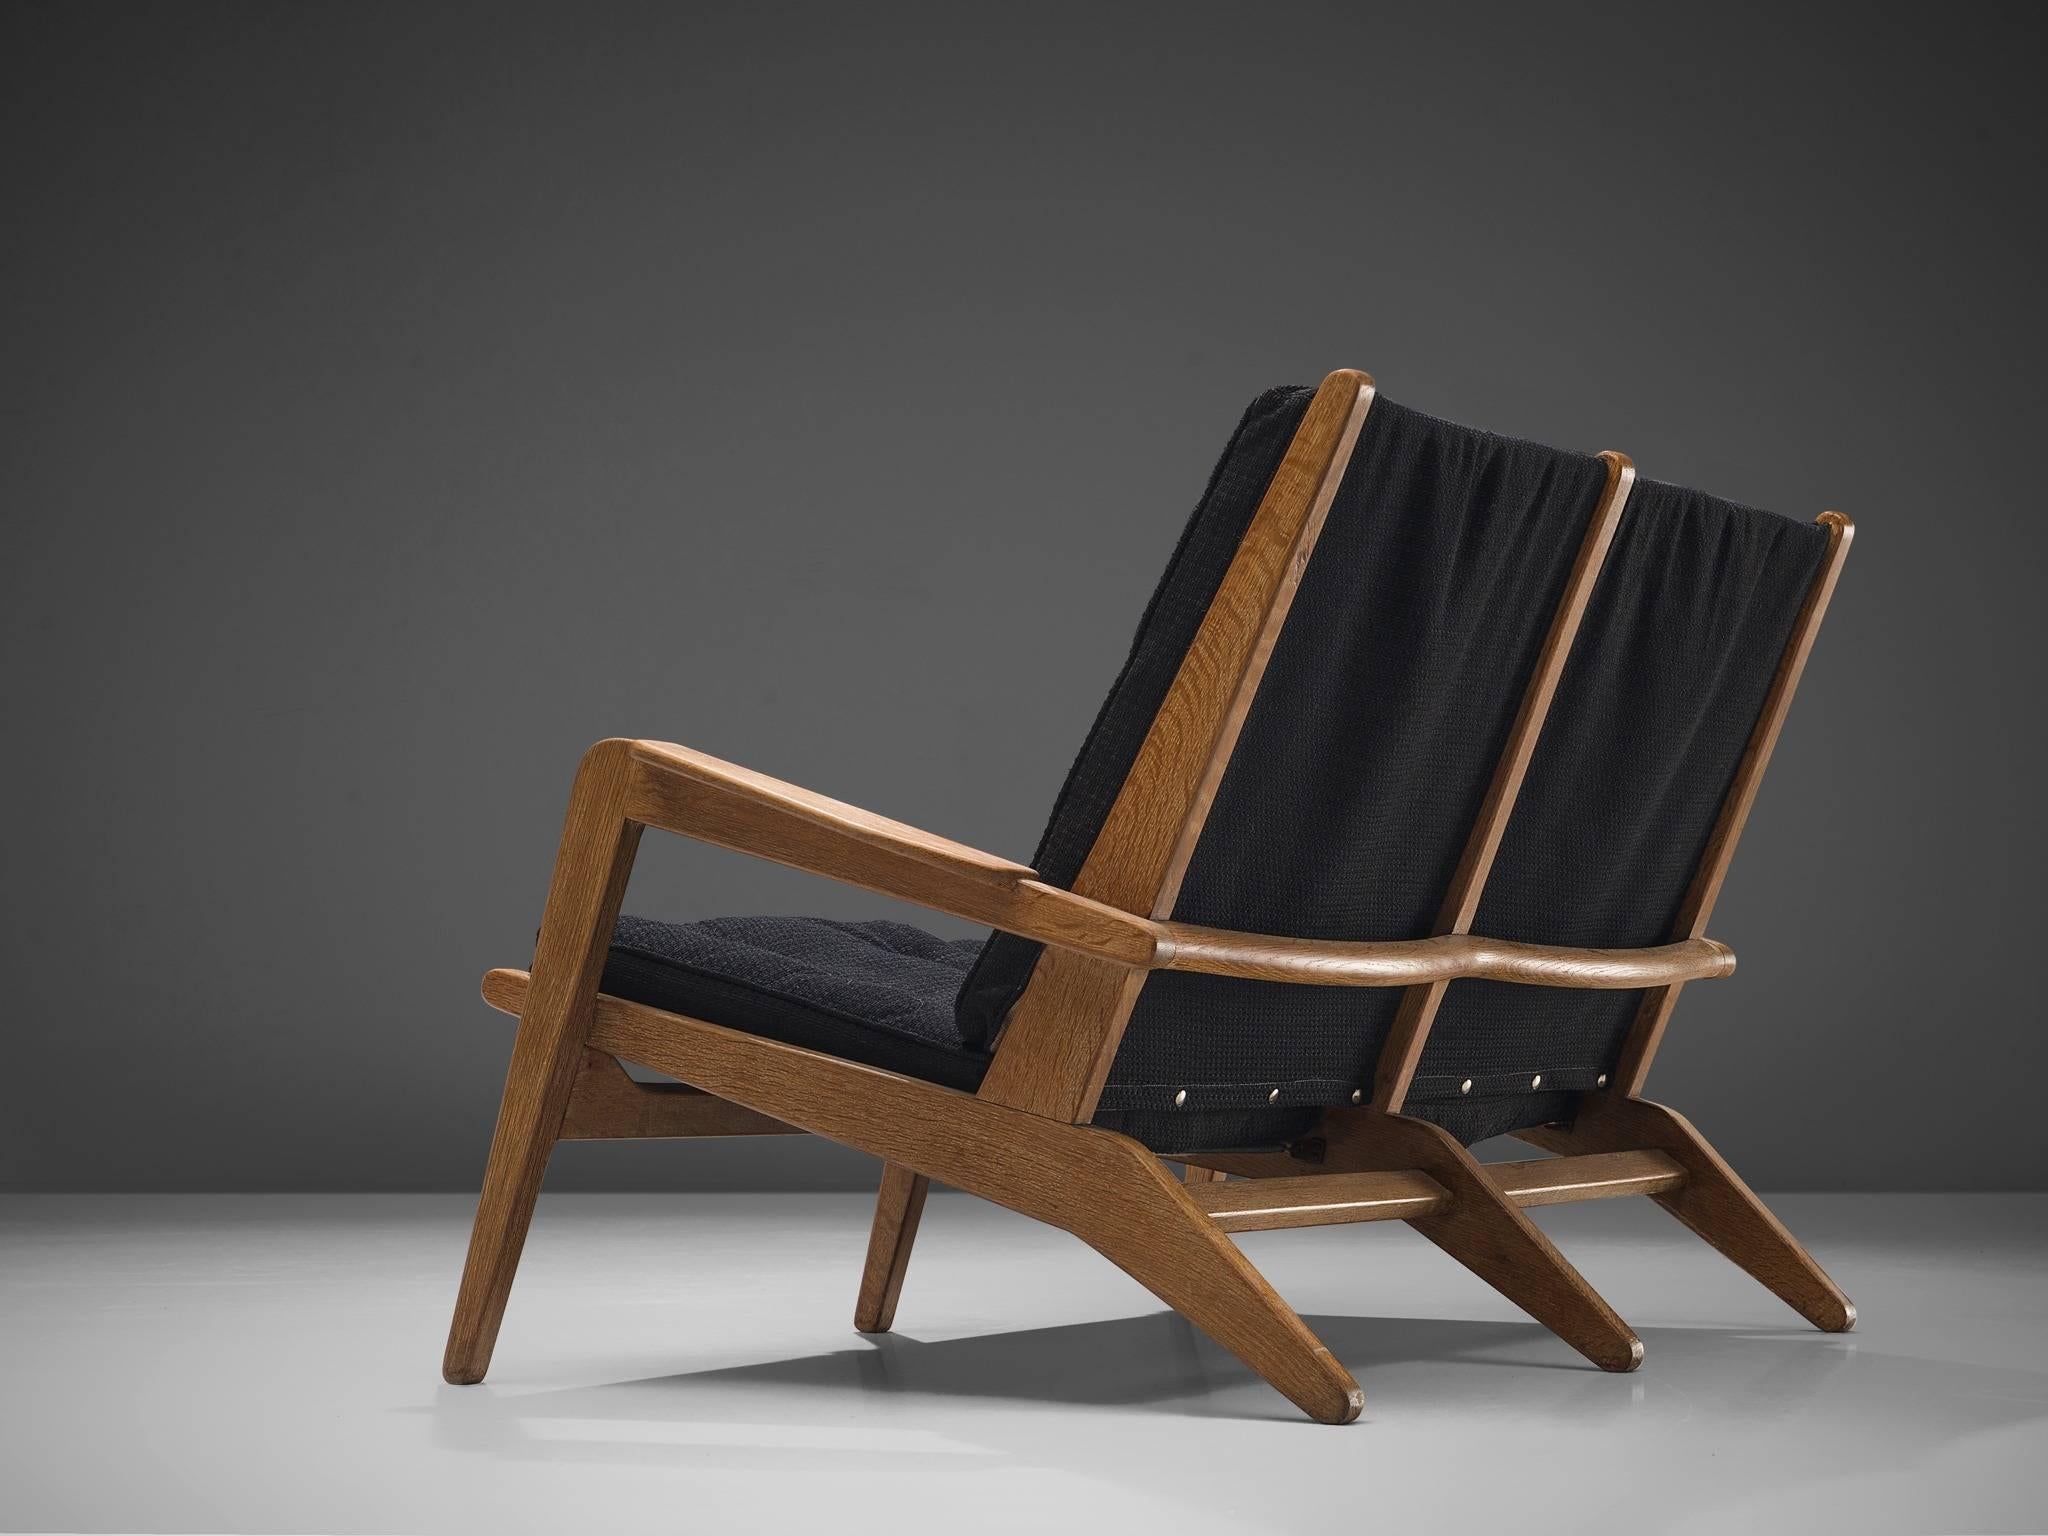 Pierre Guariche for Airborne, settee, solid oak, black fabric, France, 1940s.

This two-seat sofa in solid oak is designed by Pierre Guariche for Airborne. The structure with spring system supports the two thick padded black fabric cushions. The